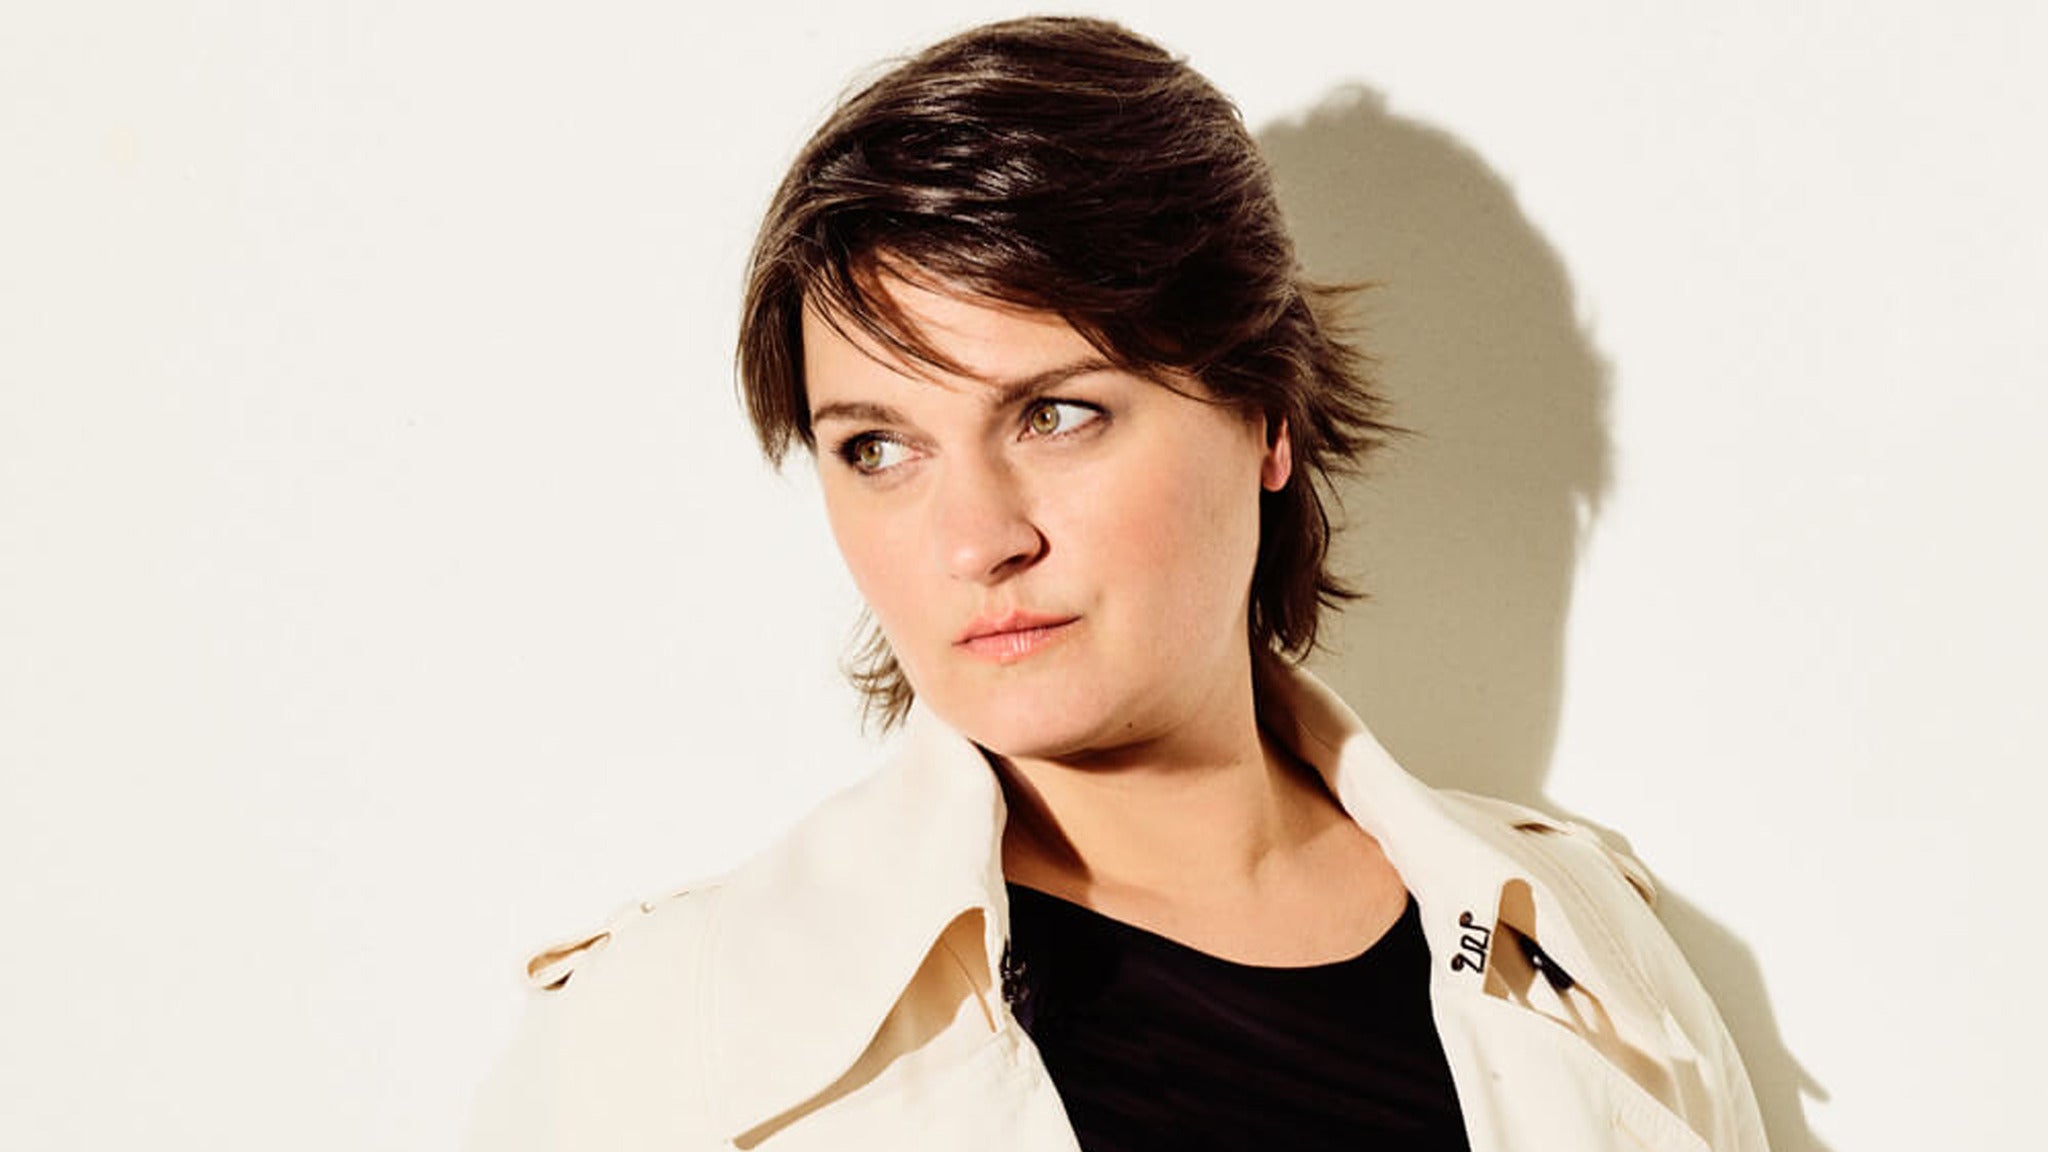 Madeleine Peyroux & Paula Cole presale password for event tickets in Harrisburg, PA (Whitaker Center)